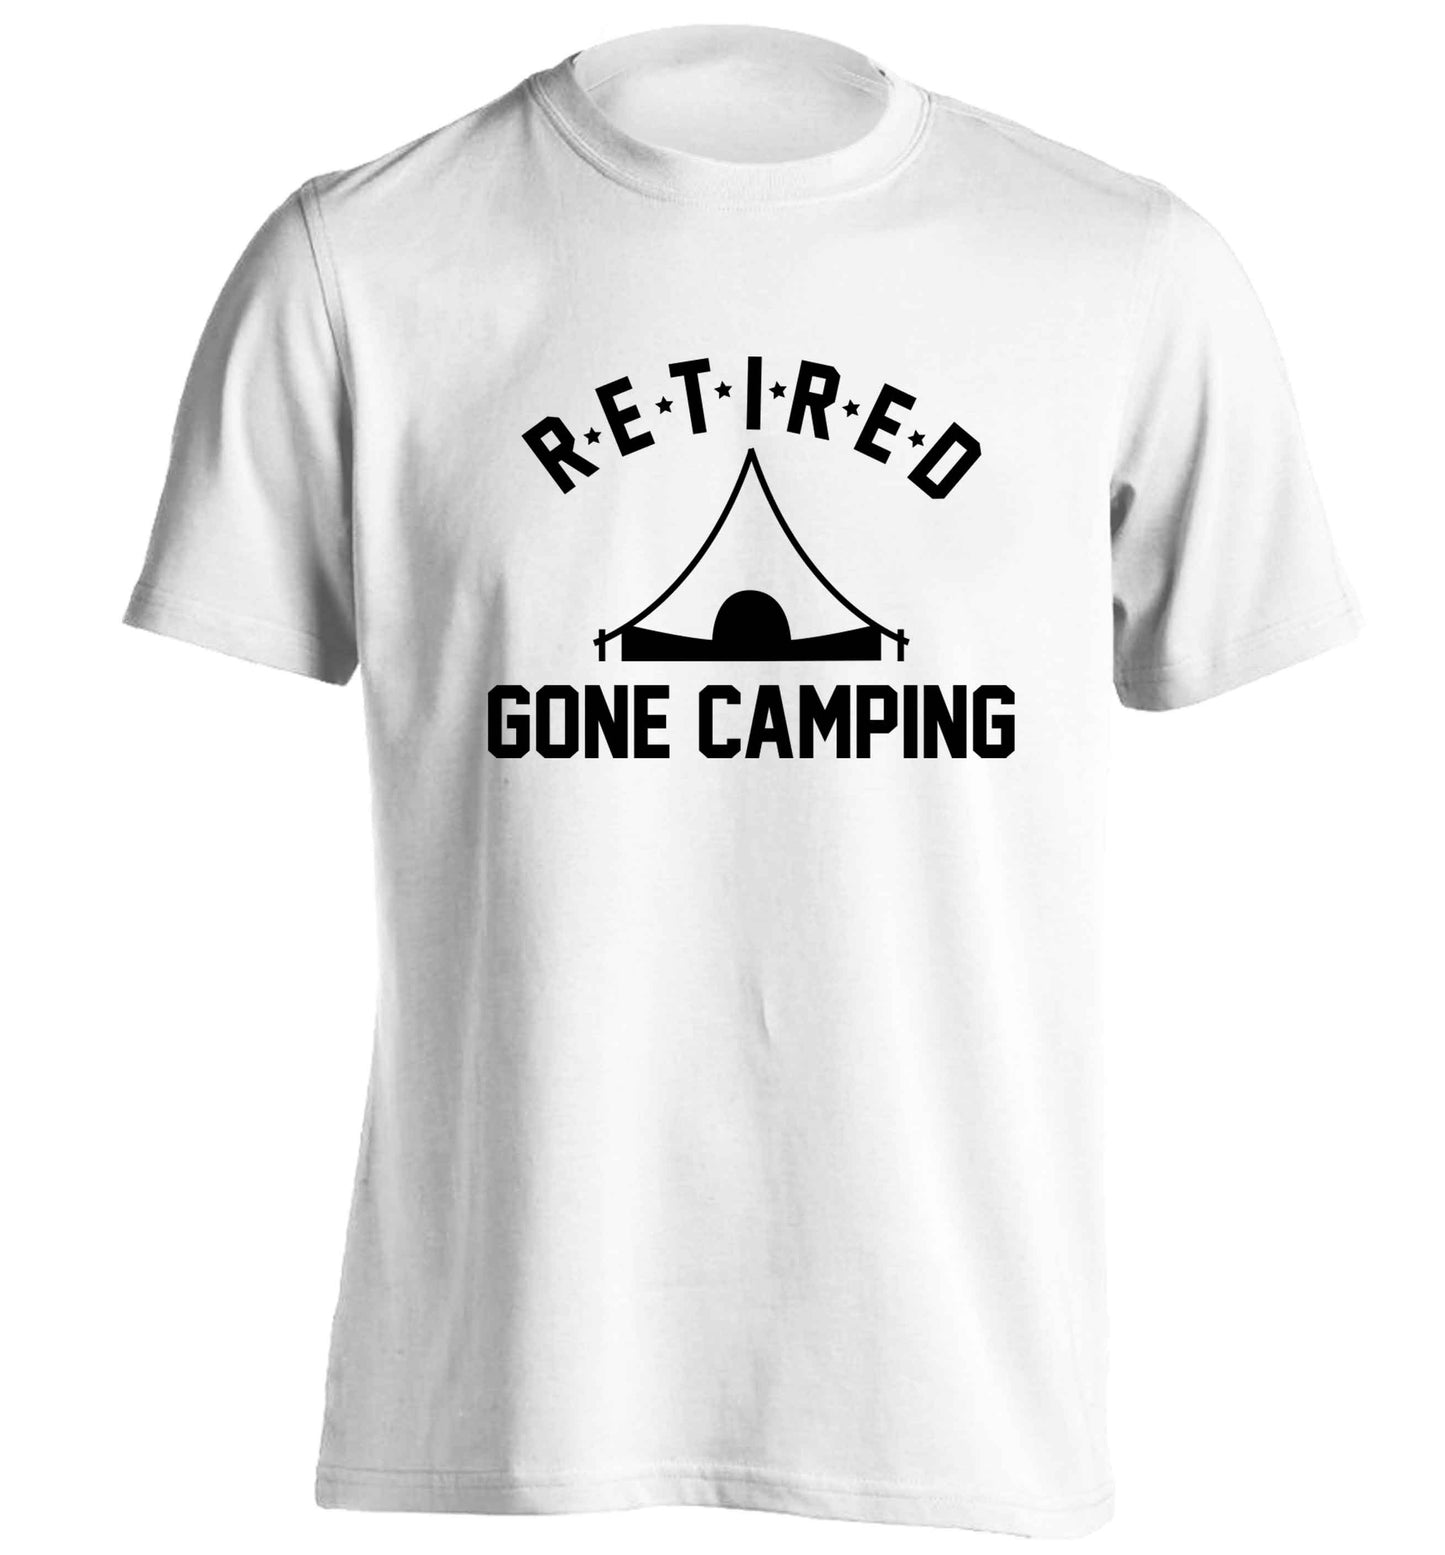 Retired gone camping adults unisex white Tshirt 2XL